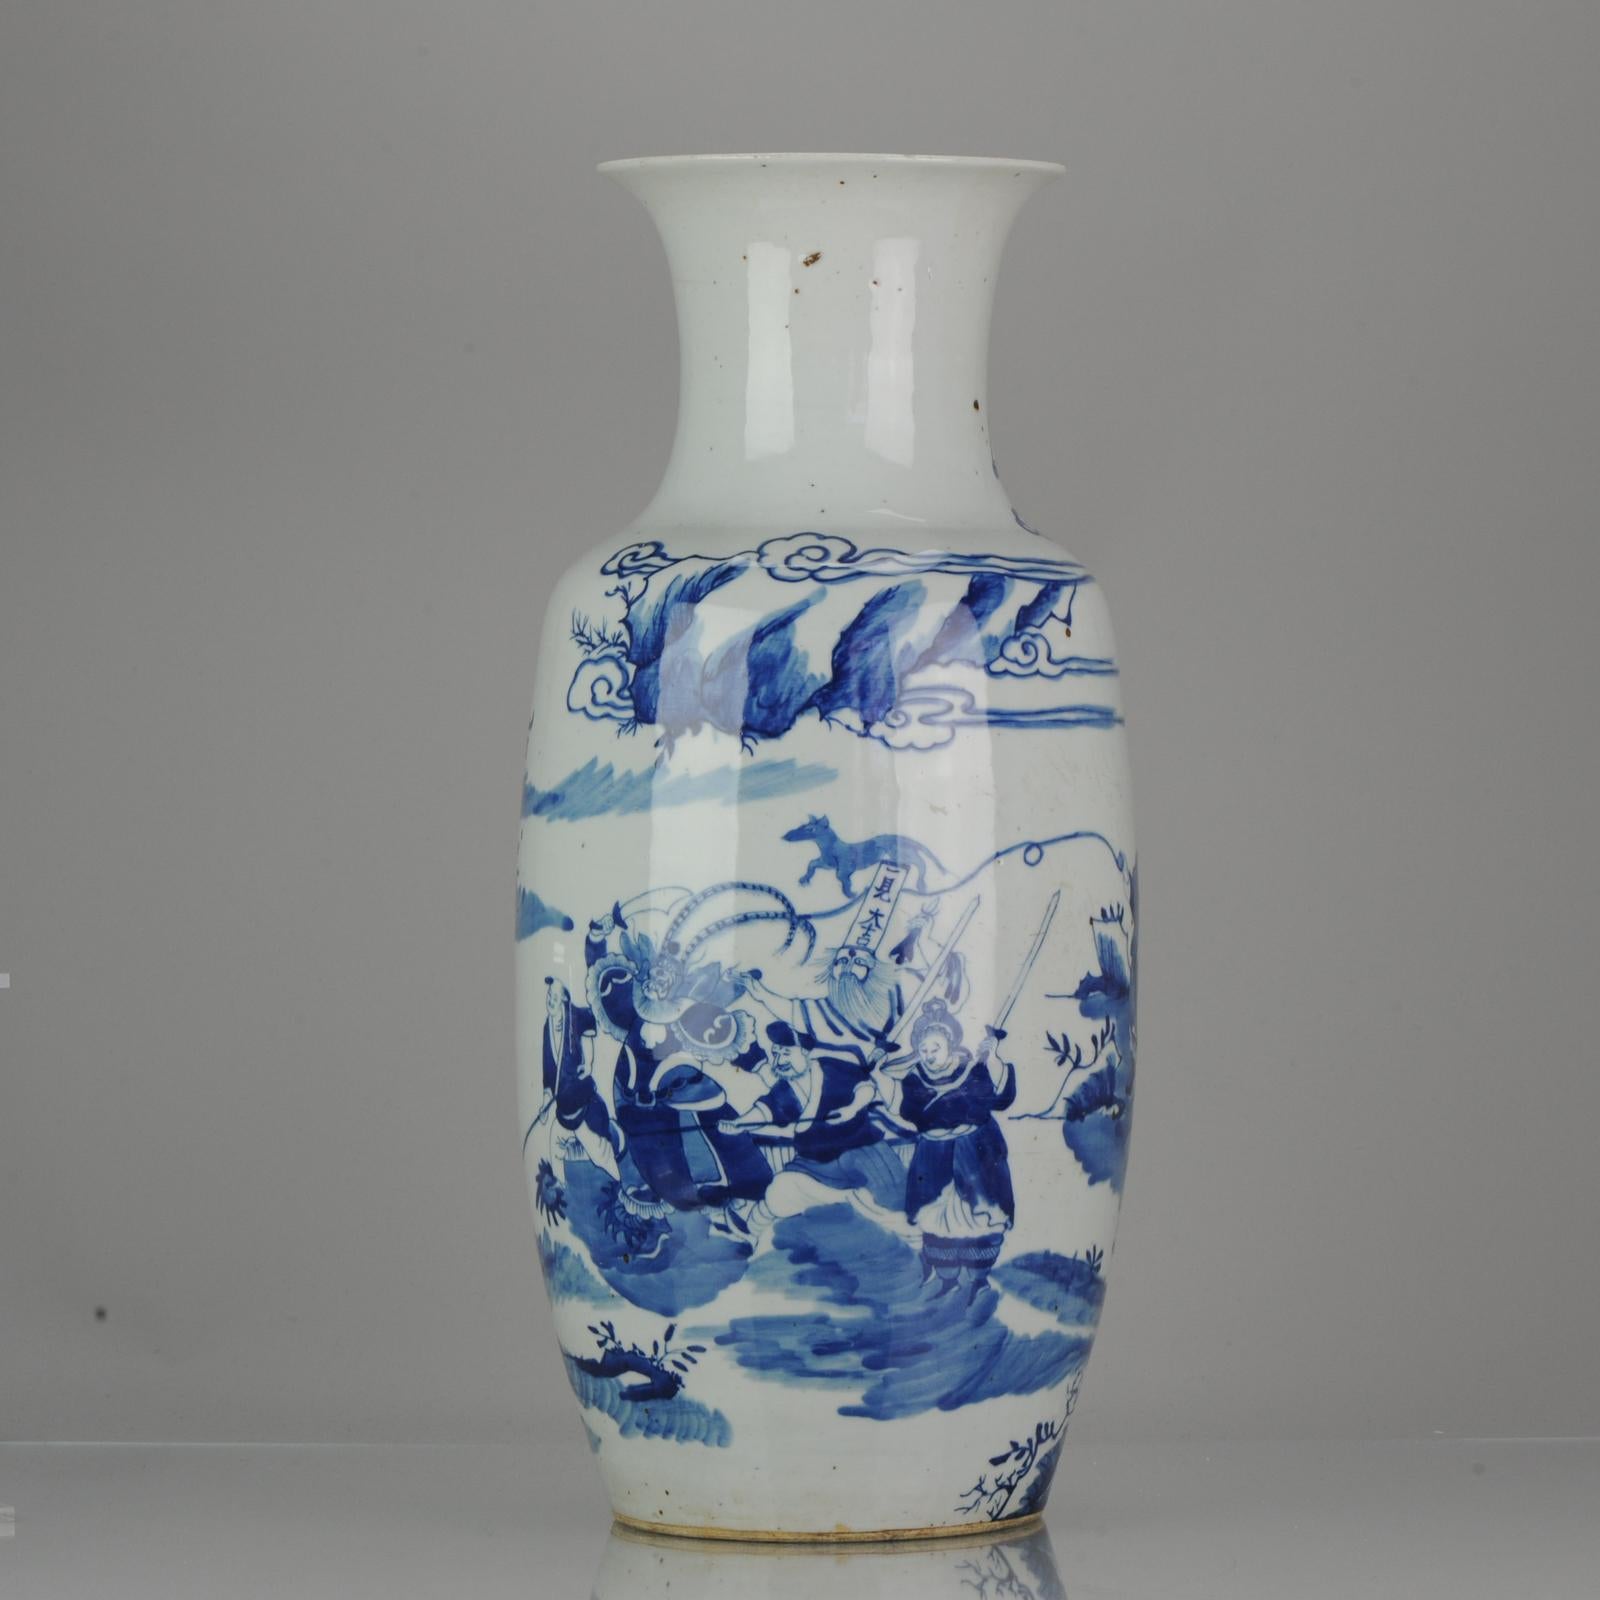 Sharing with you this nicely Baluster shaped vase. The vase painted in underglaze blue with a continuous scene of the Heibai Wuchang, literally 